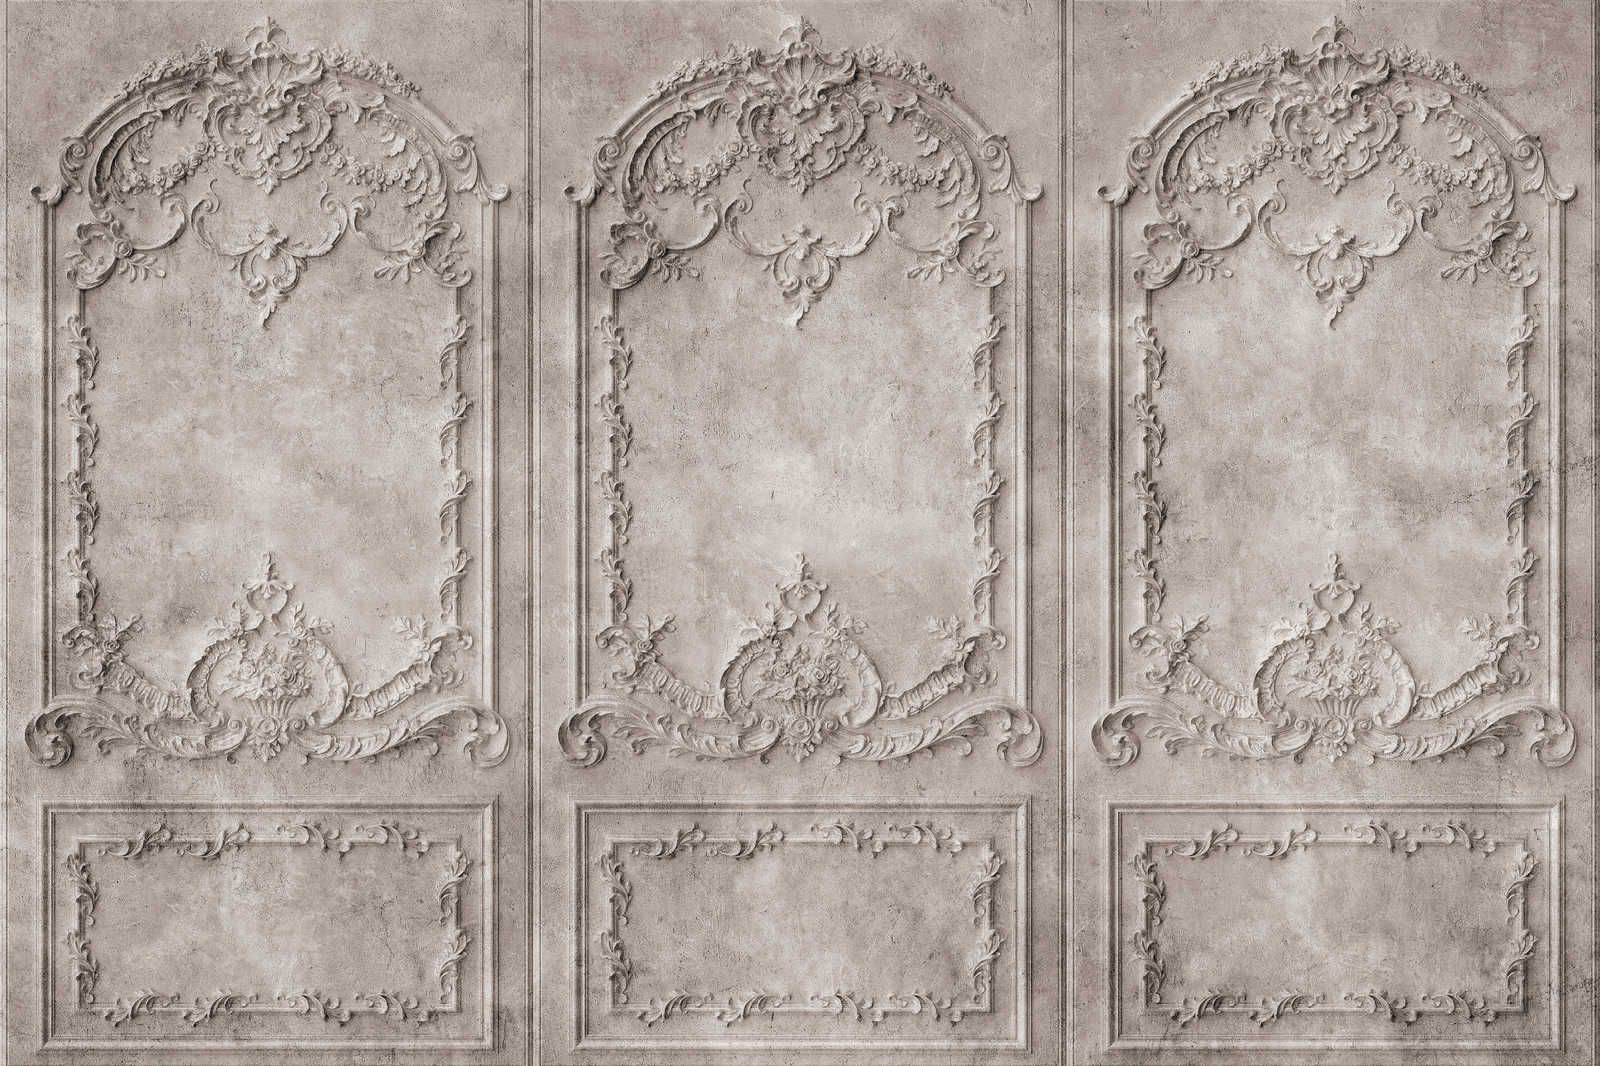             Versailles 1 - Canvas painting Grey-Brown Baroque style wooden panels - 0.90 m x 0.60 m
        